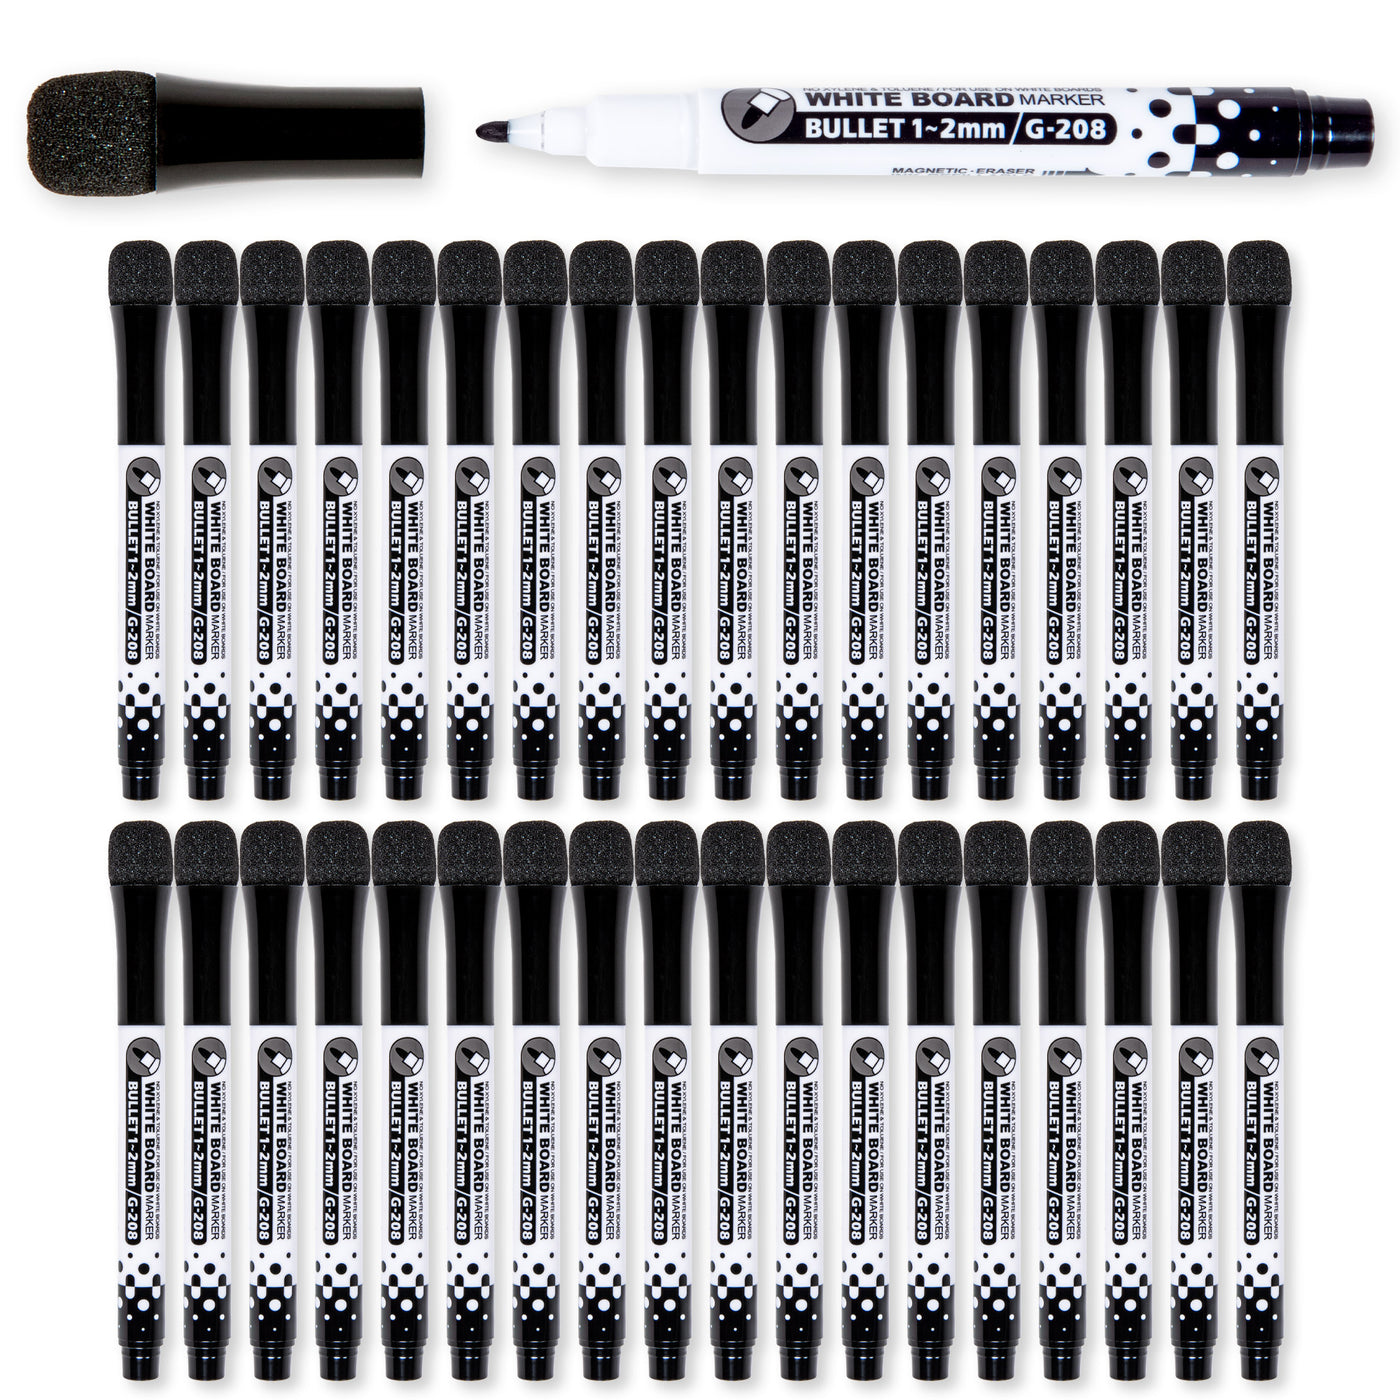 Classroom Pack 36 Pack Fine Tip Dry Erase Colored Markers